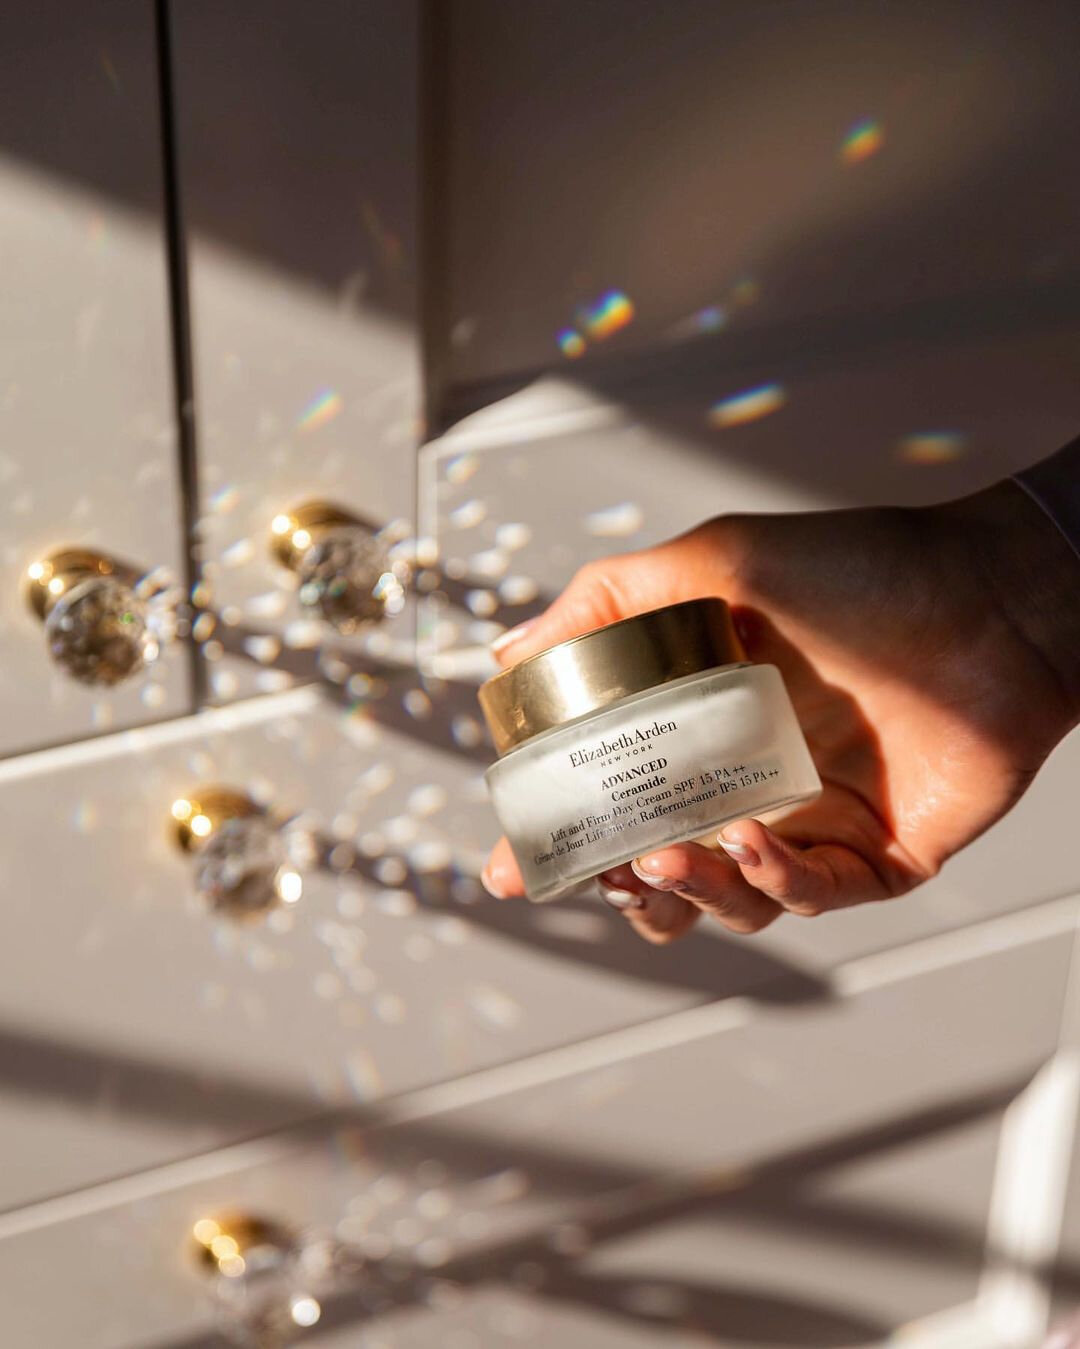 Protecting your skin from harmful UVA and UVB rays is key to achieving a healthy, youthful-looking complexion. ☀️ @elizabetharden's Advanced Ceramide Lift and Firm Day Cream not only firms, hydrates, and tightens skin, BUT also gives you a head start